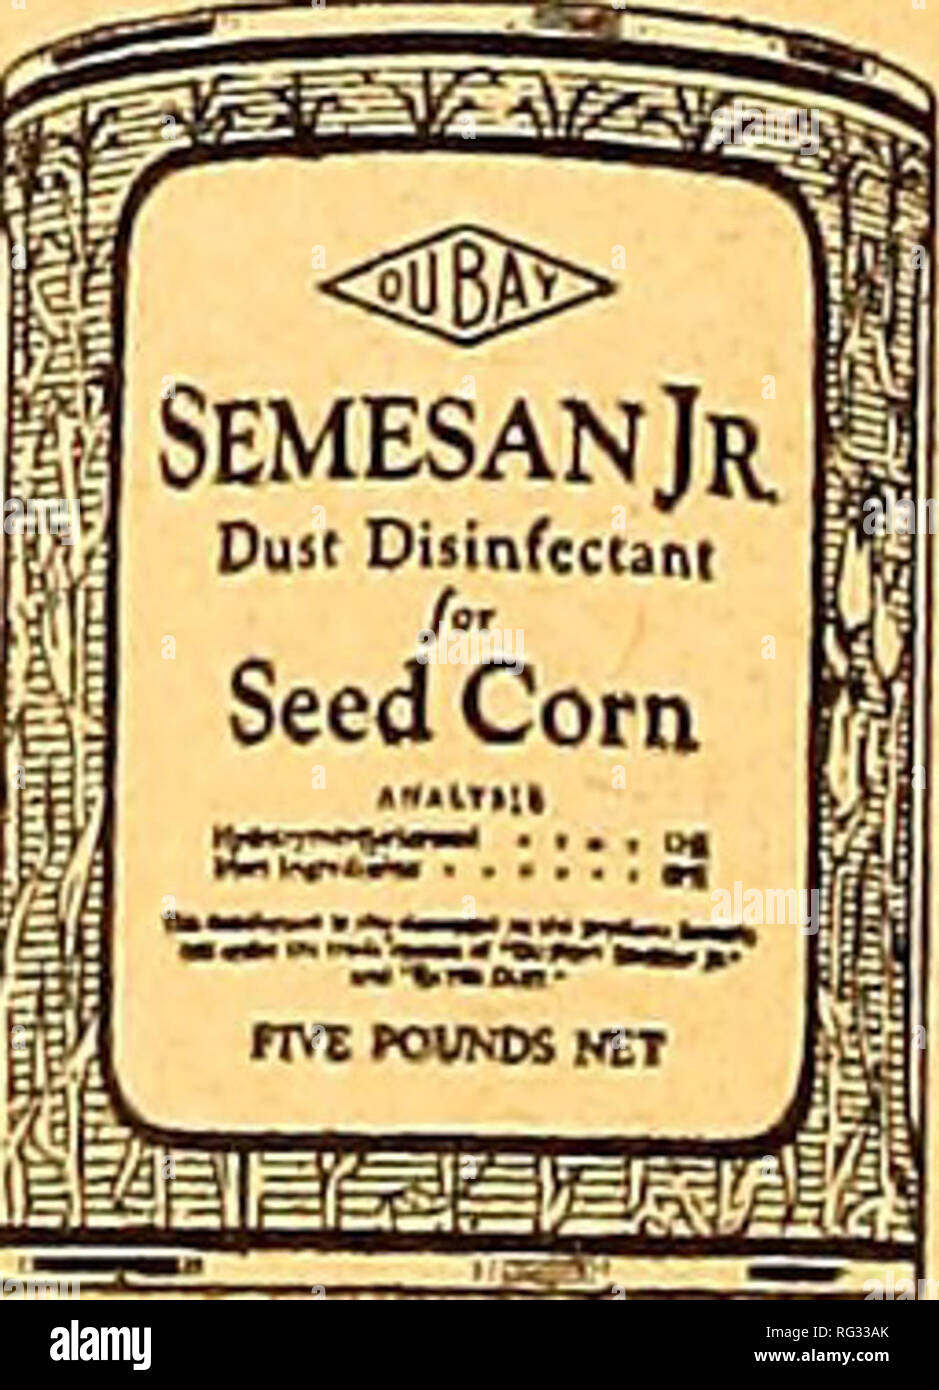 . California gardening. Nurseries (Horticulture) Catalogs; Flowers Seeds Catalogs; Plants, Ornamental Catalogs; Vegetables Seeds Catalogs; Trees Catalogs; Grasses Seeds Catalogs; Gardening Equipment and supplies Catalogs. Prices For Du Pont Semesan 2 ozs „ S 0.50 1 lb 2.75 5 lbs 13.00 Prices for Jr. and Bel 1 lb. $ 1.75 5 lbs „   8.00 25 lbs 31.25 Cannot be mailed.. QUICKLY KILLS GARDEN PESTS Science Provides New Safe Method that Does the Work Without Fuss Snails, Cutworms, Slugs, Grasshoppers, Sowbugs, Earwigs, etc., are Exterminated Snarol is a ready prepared meal that you simply broadcast o Stock Photo